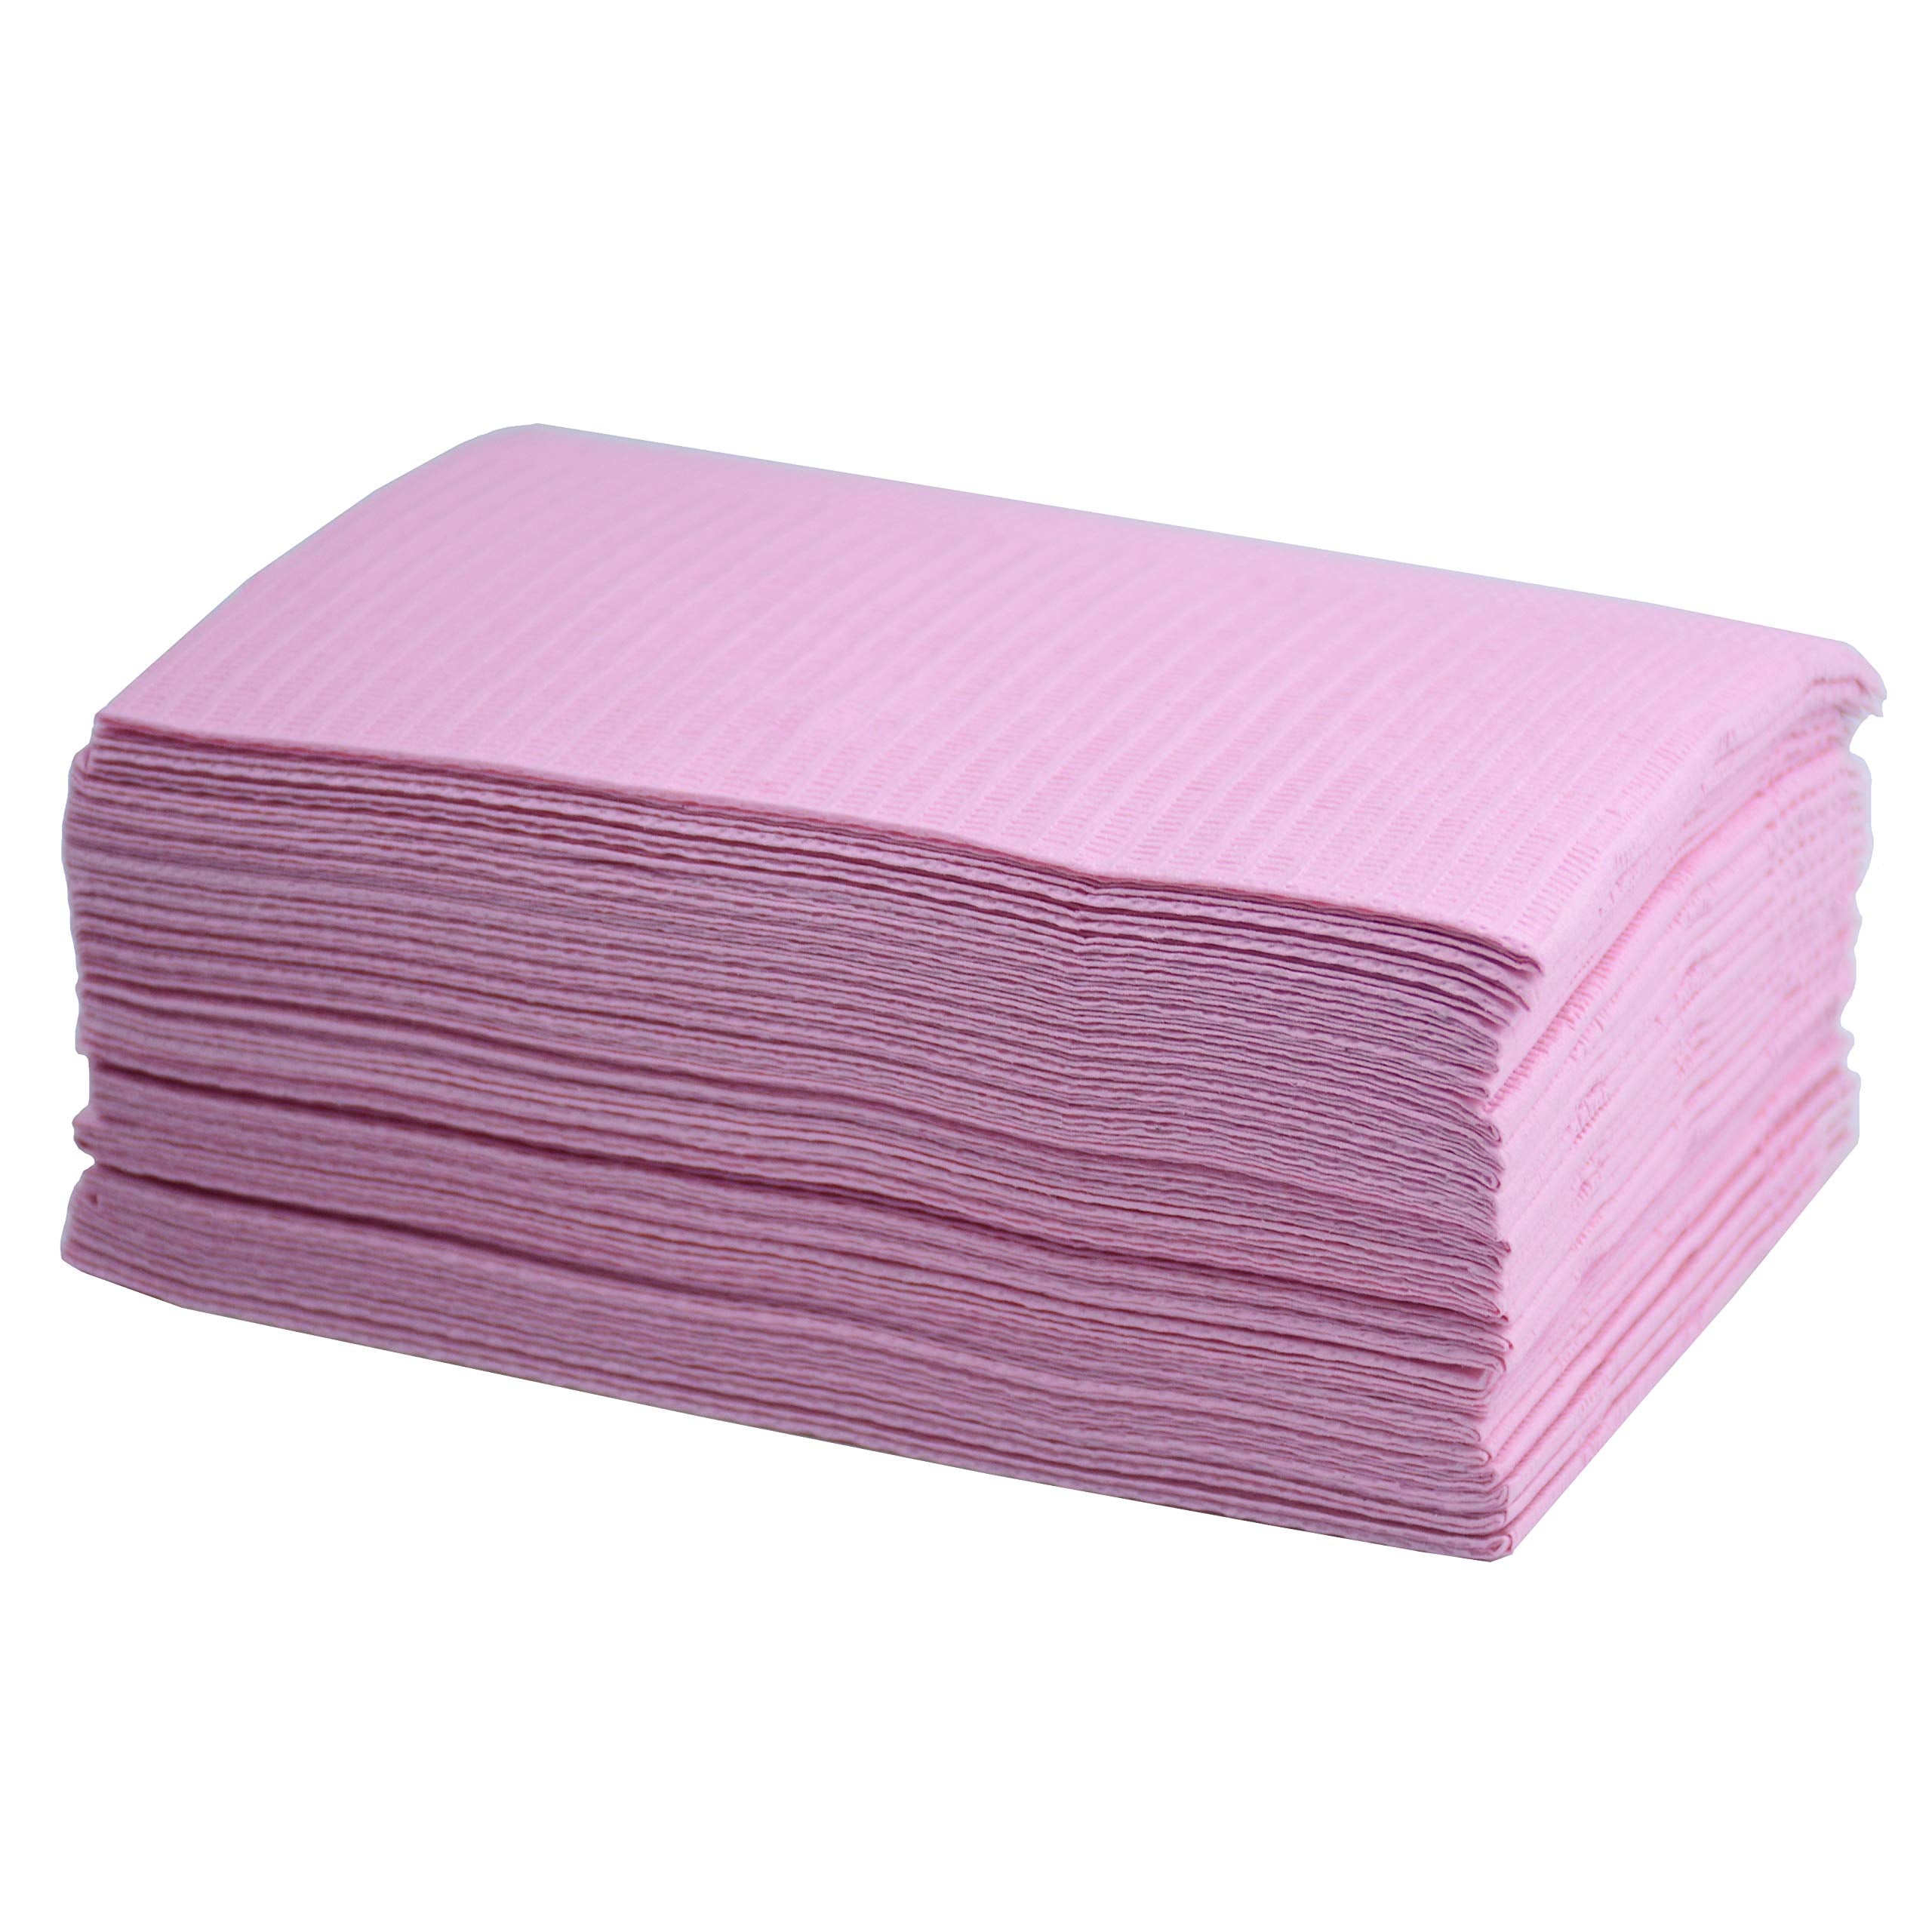 Aokbean 125pcs 13x17.7 inch 3 Ply Disposable Tattoo Tablecloth Waterproof Tattoo Tablecloth Towel Cleaning Pad Table Cover Cloth for Tattoo Supplies (Pink)